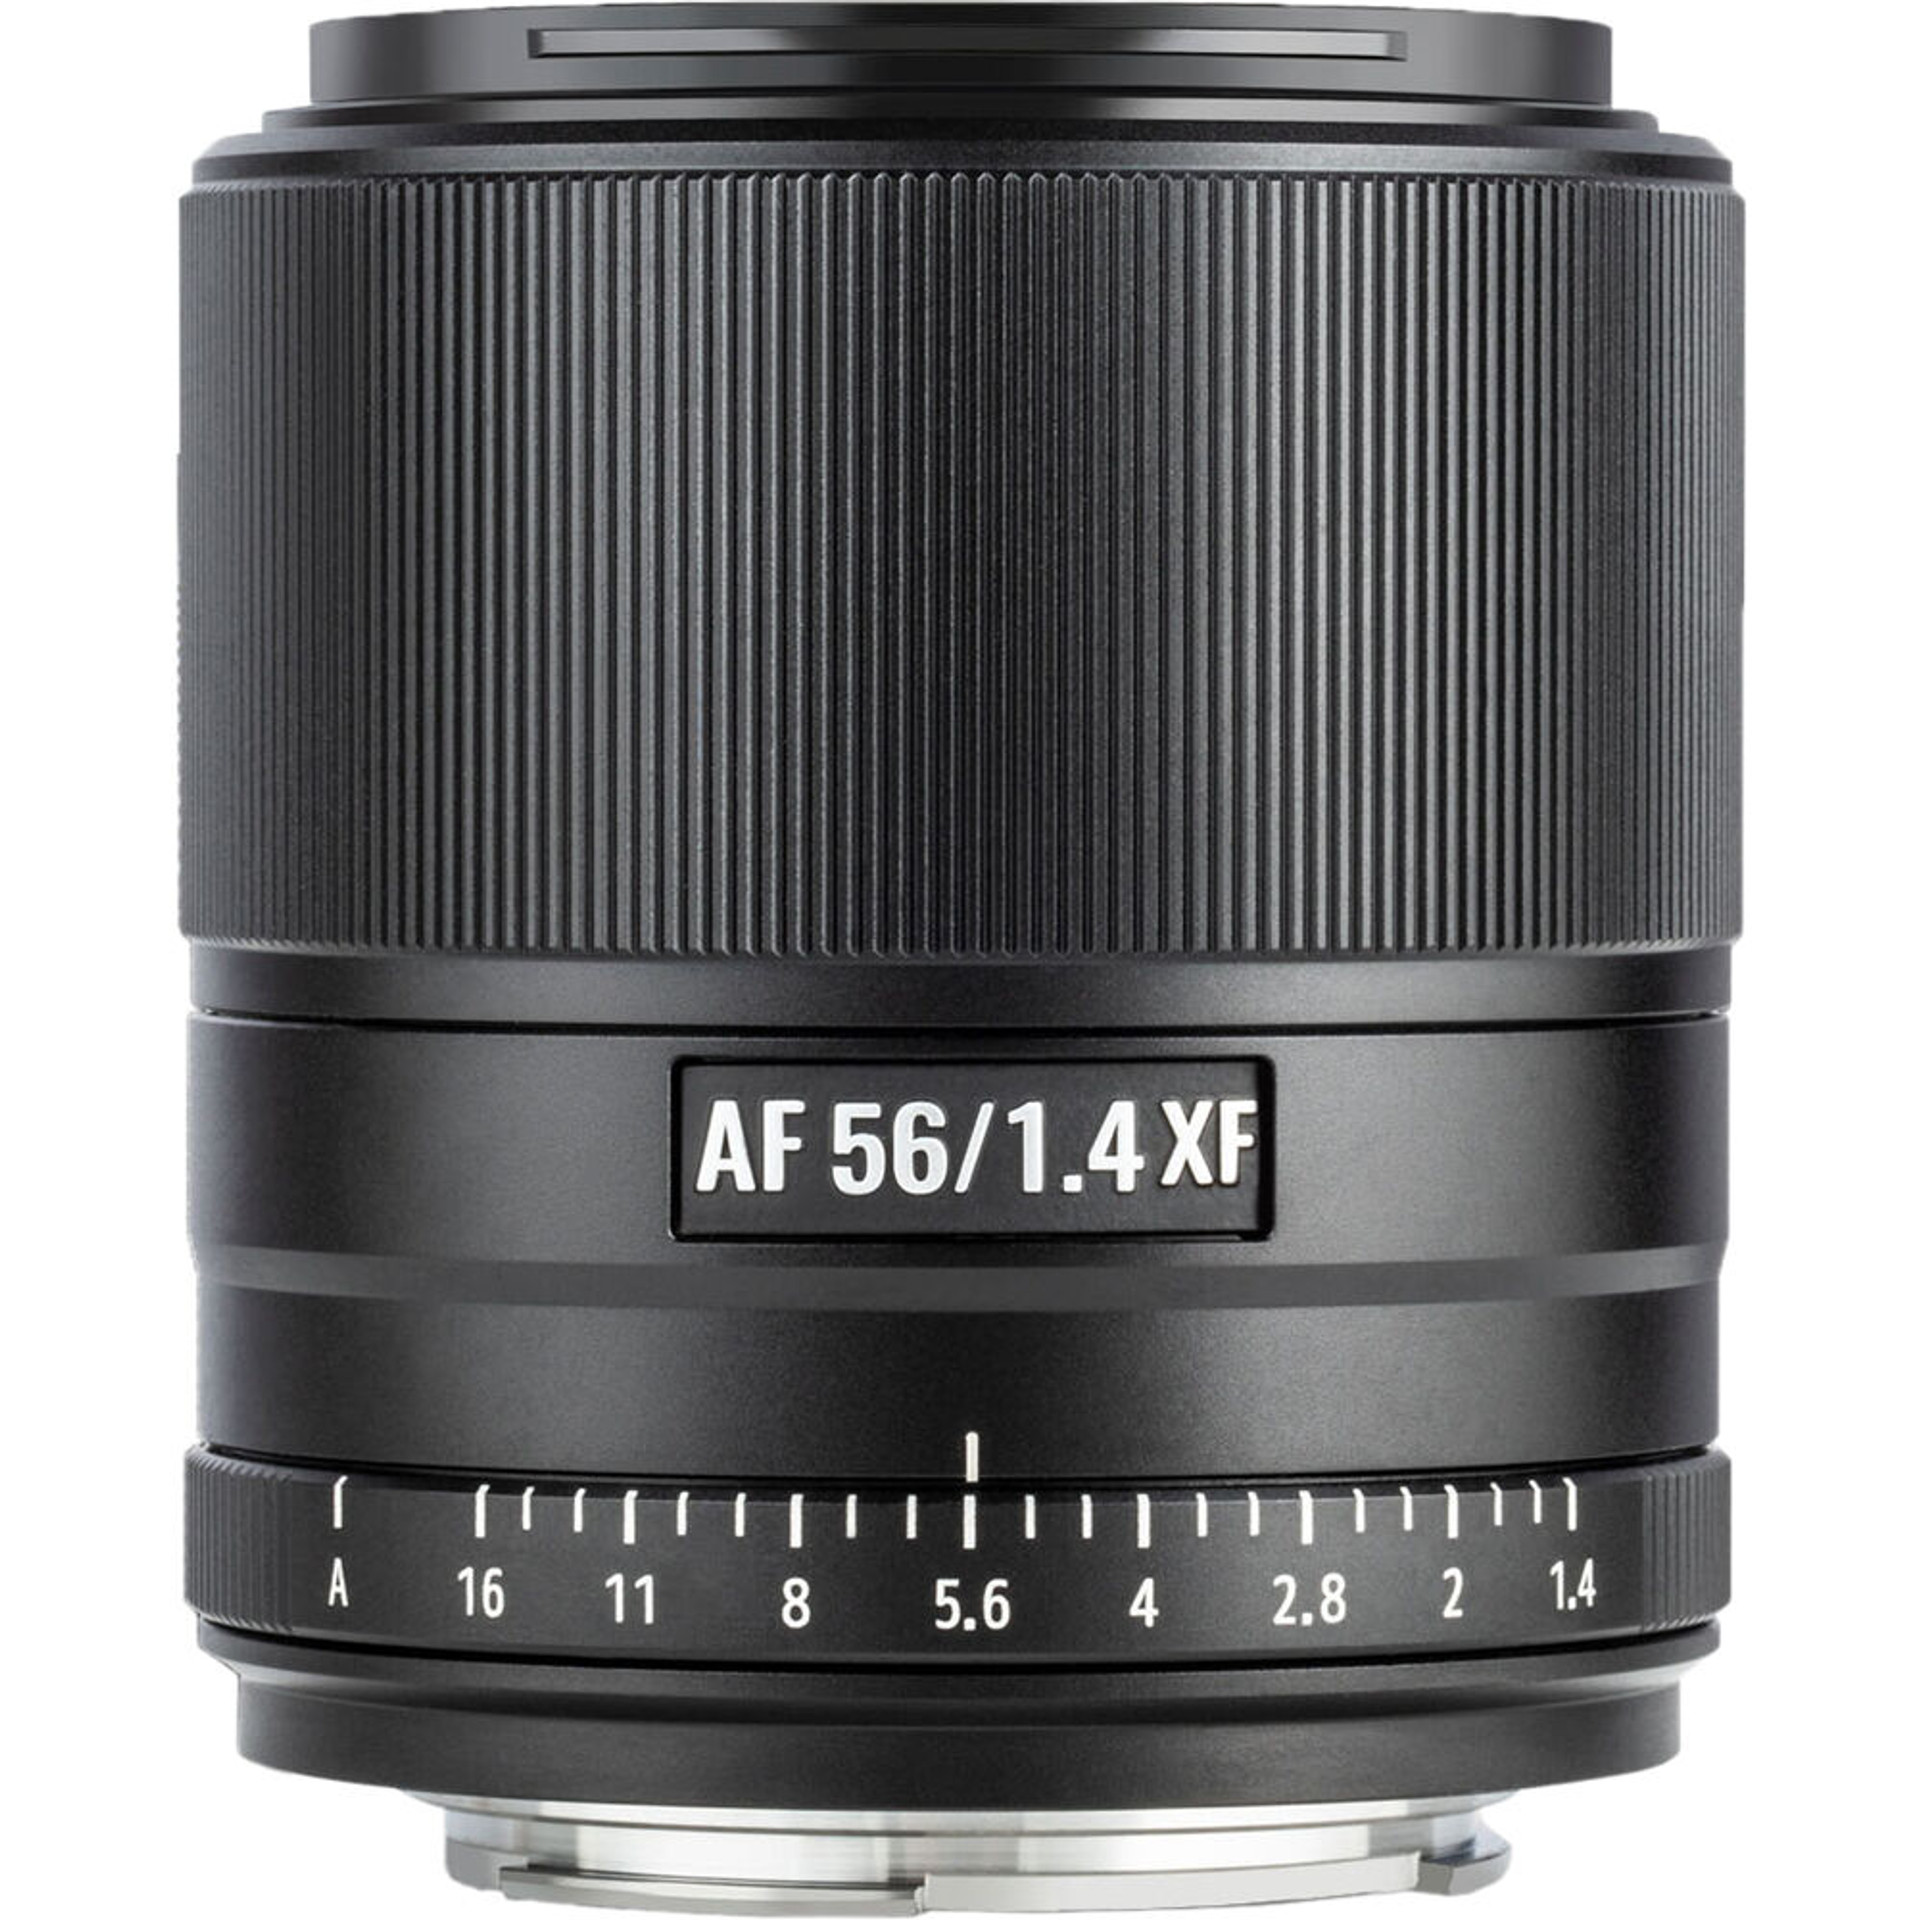 Viltrox AF 56mm f/1.4 XF Lens for FUJIFILM X 1311 at Acephoto.net